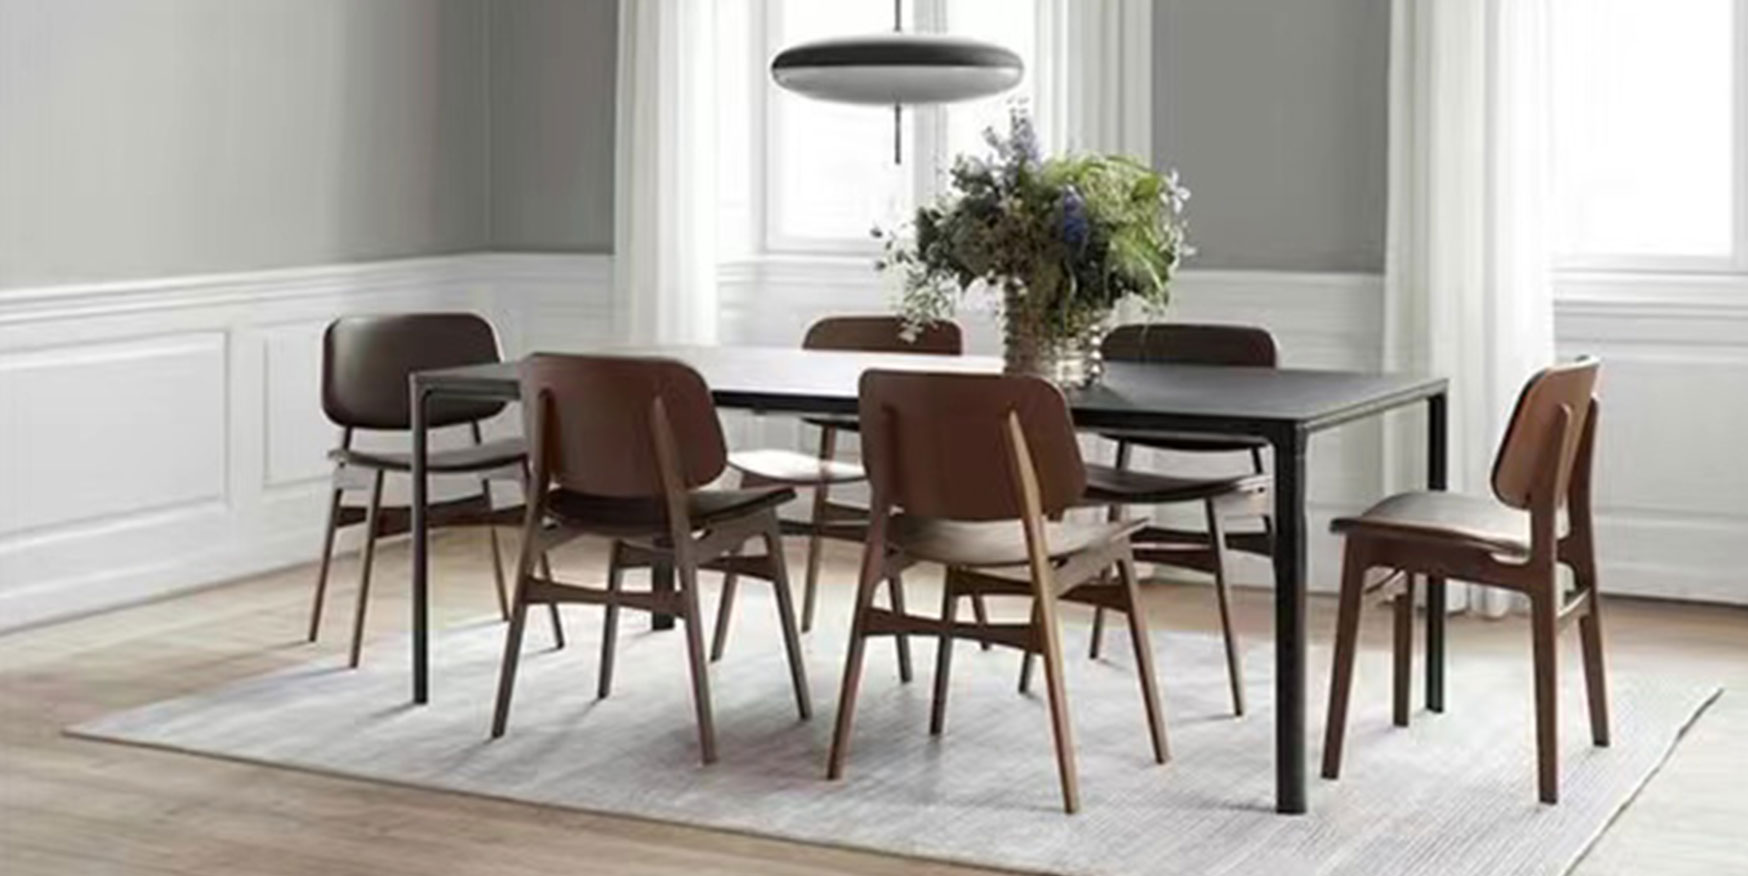 bentwood bar chairs